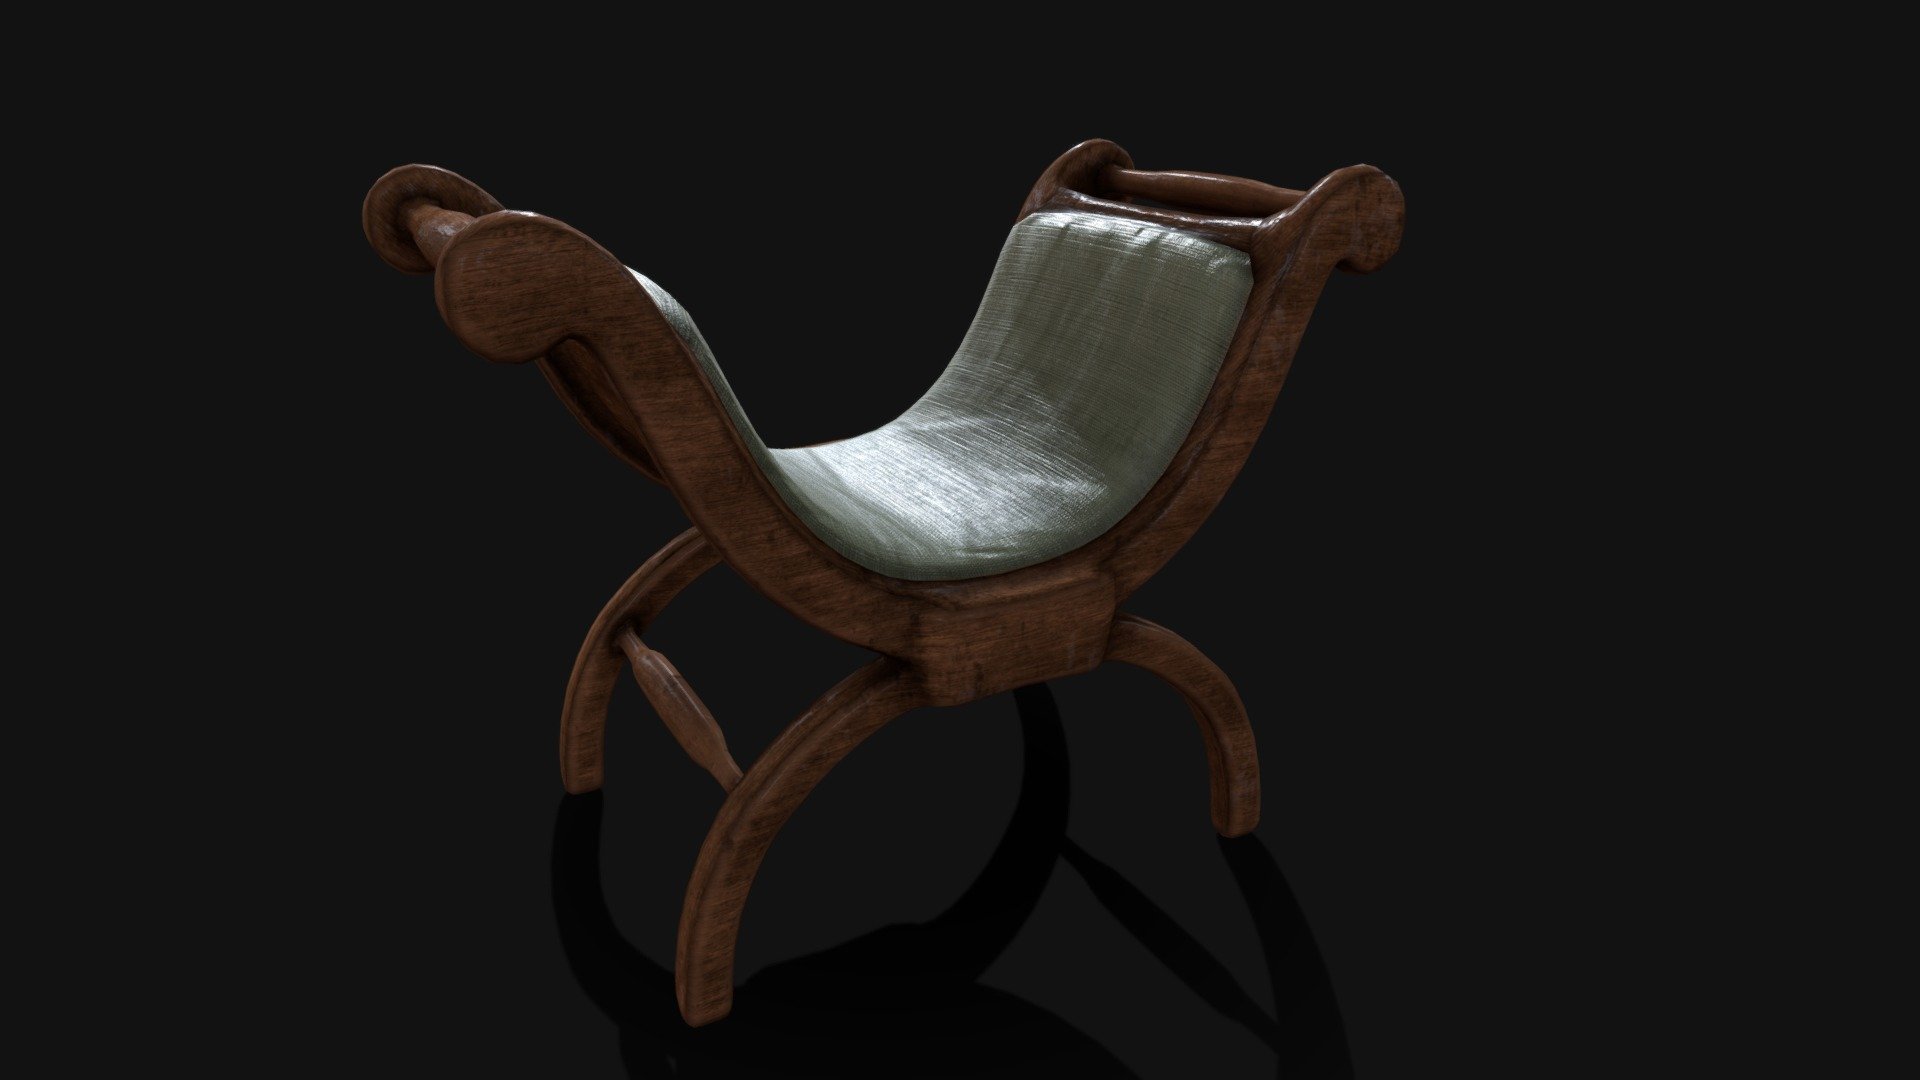 This curule chair, from the latin sella curulis, is a style of chair known for its curved legs 3d model